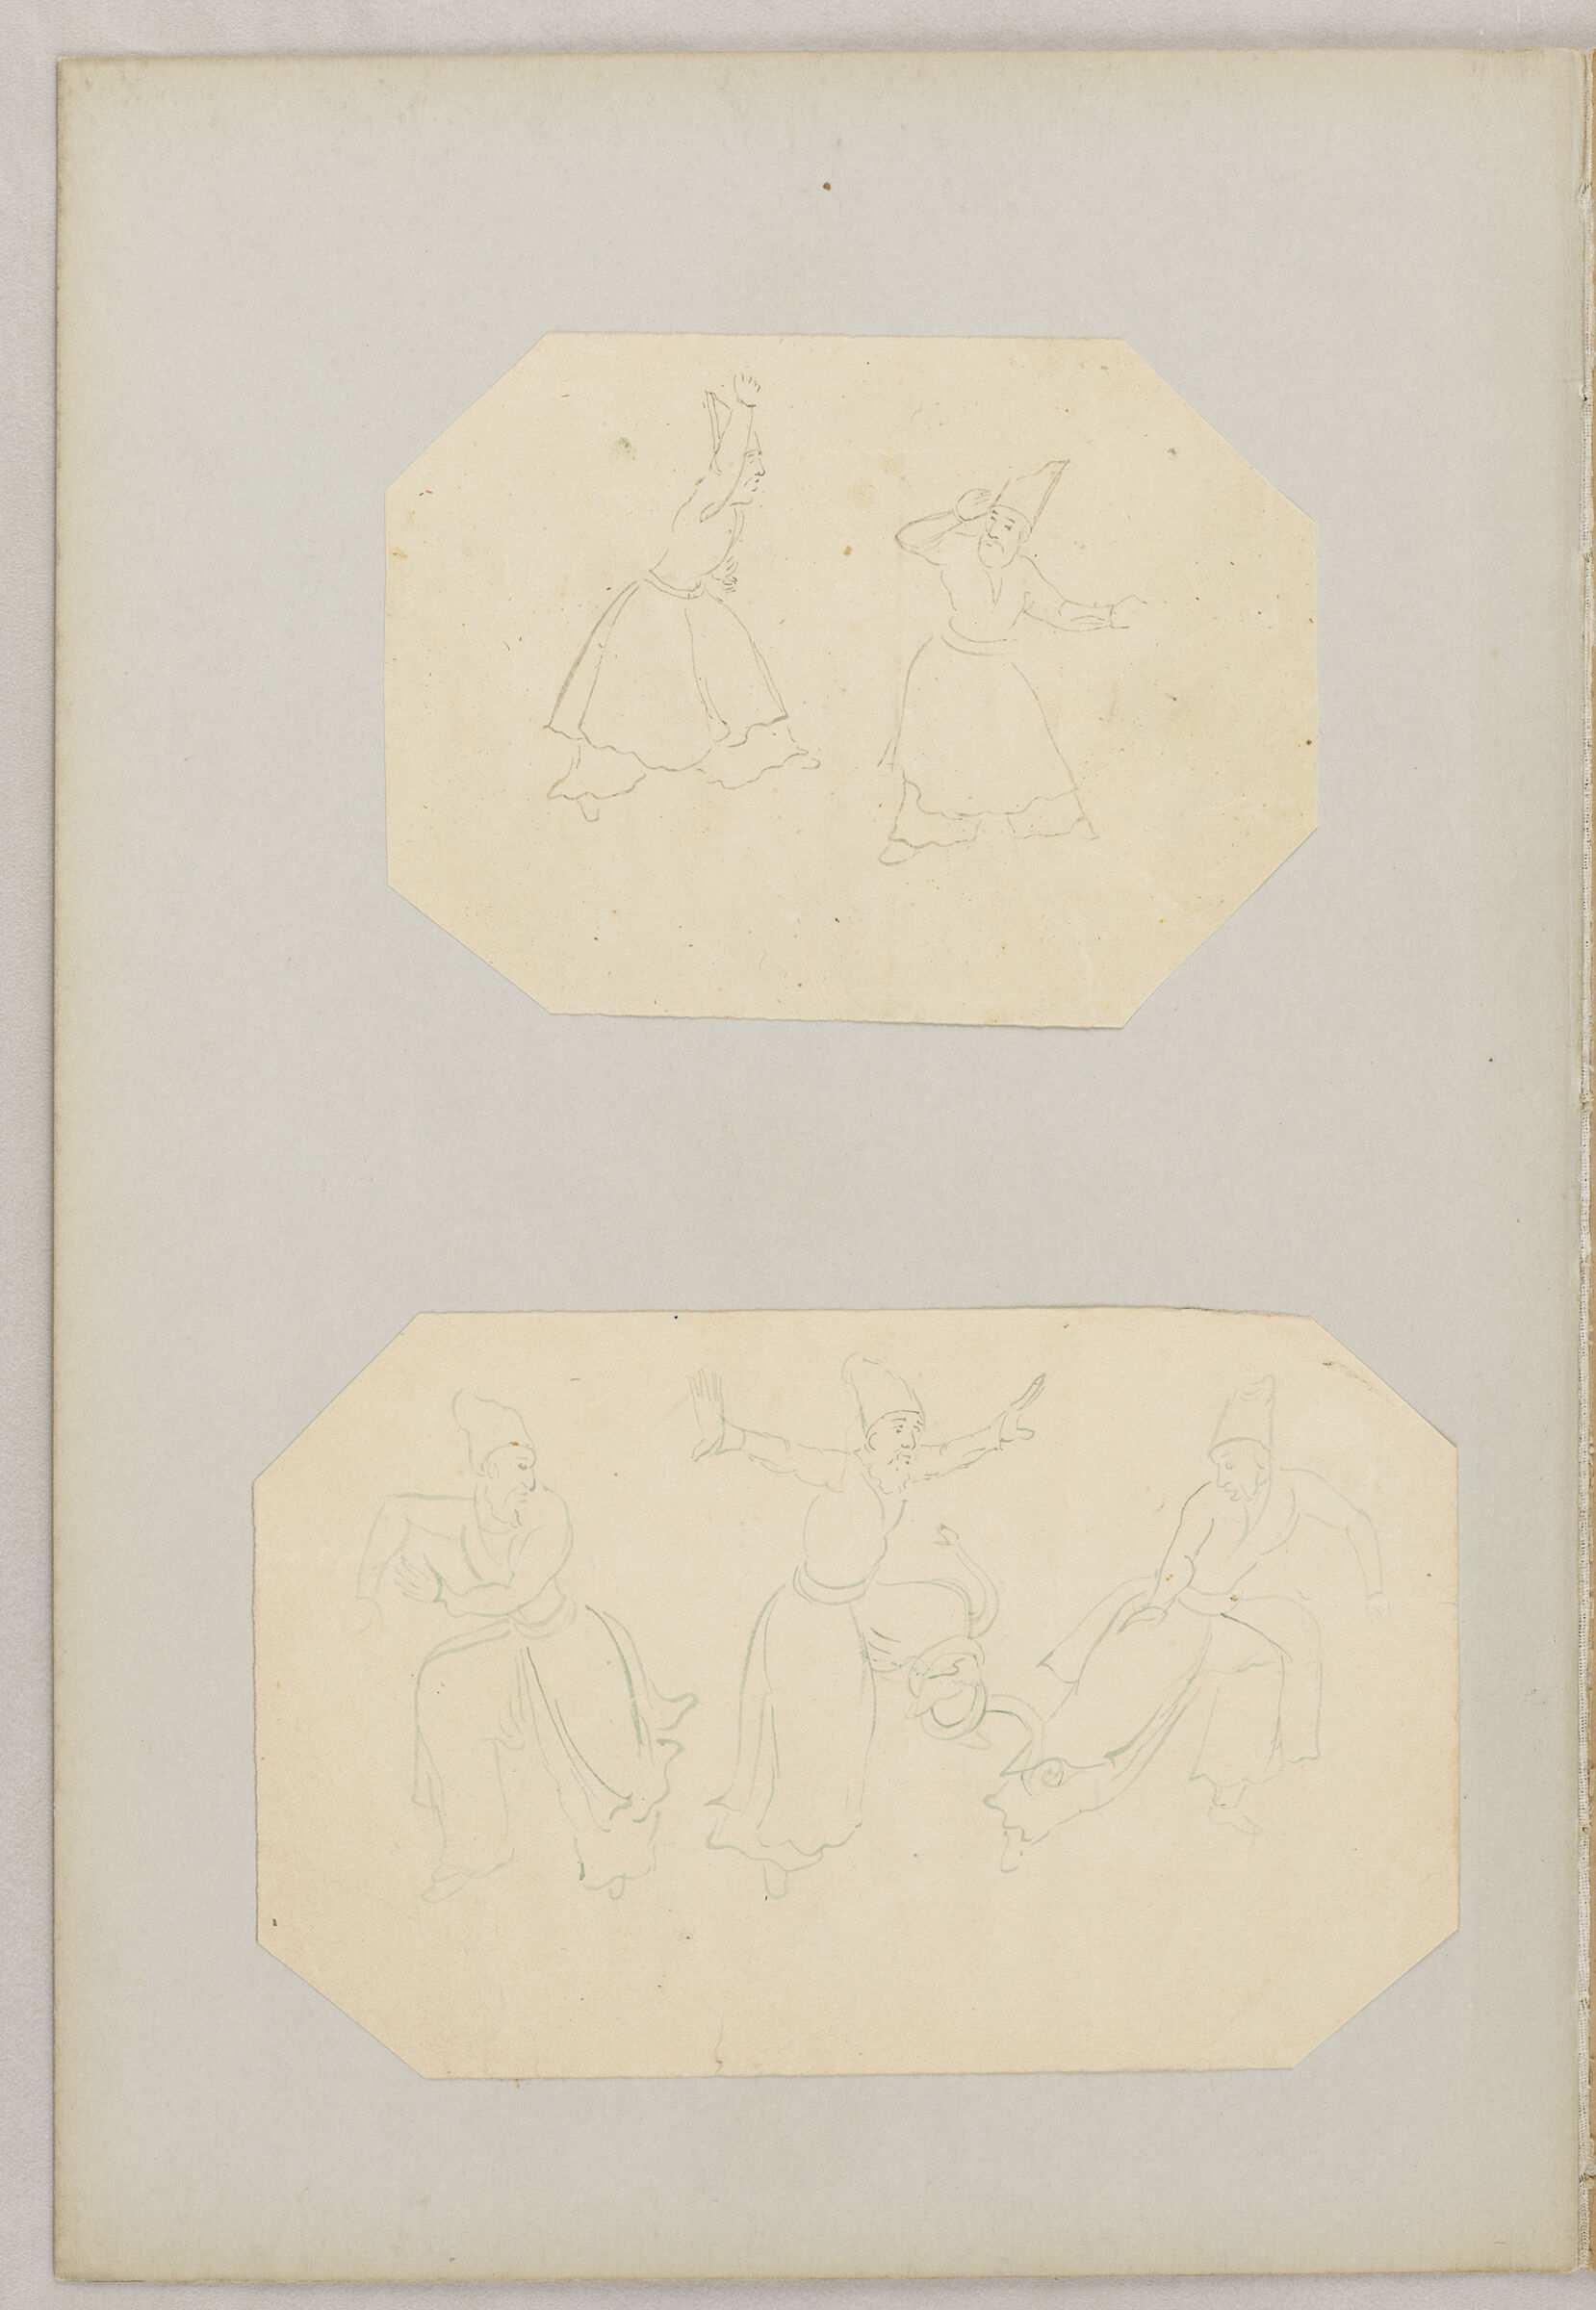 Folio 26 From An Album Of Drawings And Paintings: Two Sheets: Pair Of Dervishes; Three Dervishes With Snake  (Recto); Blank Page (Verso)